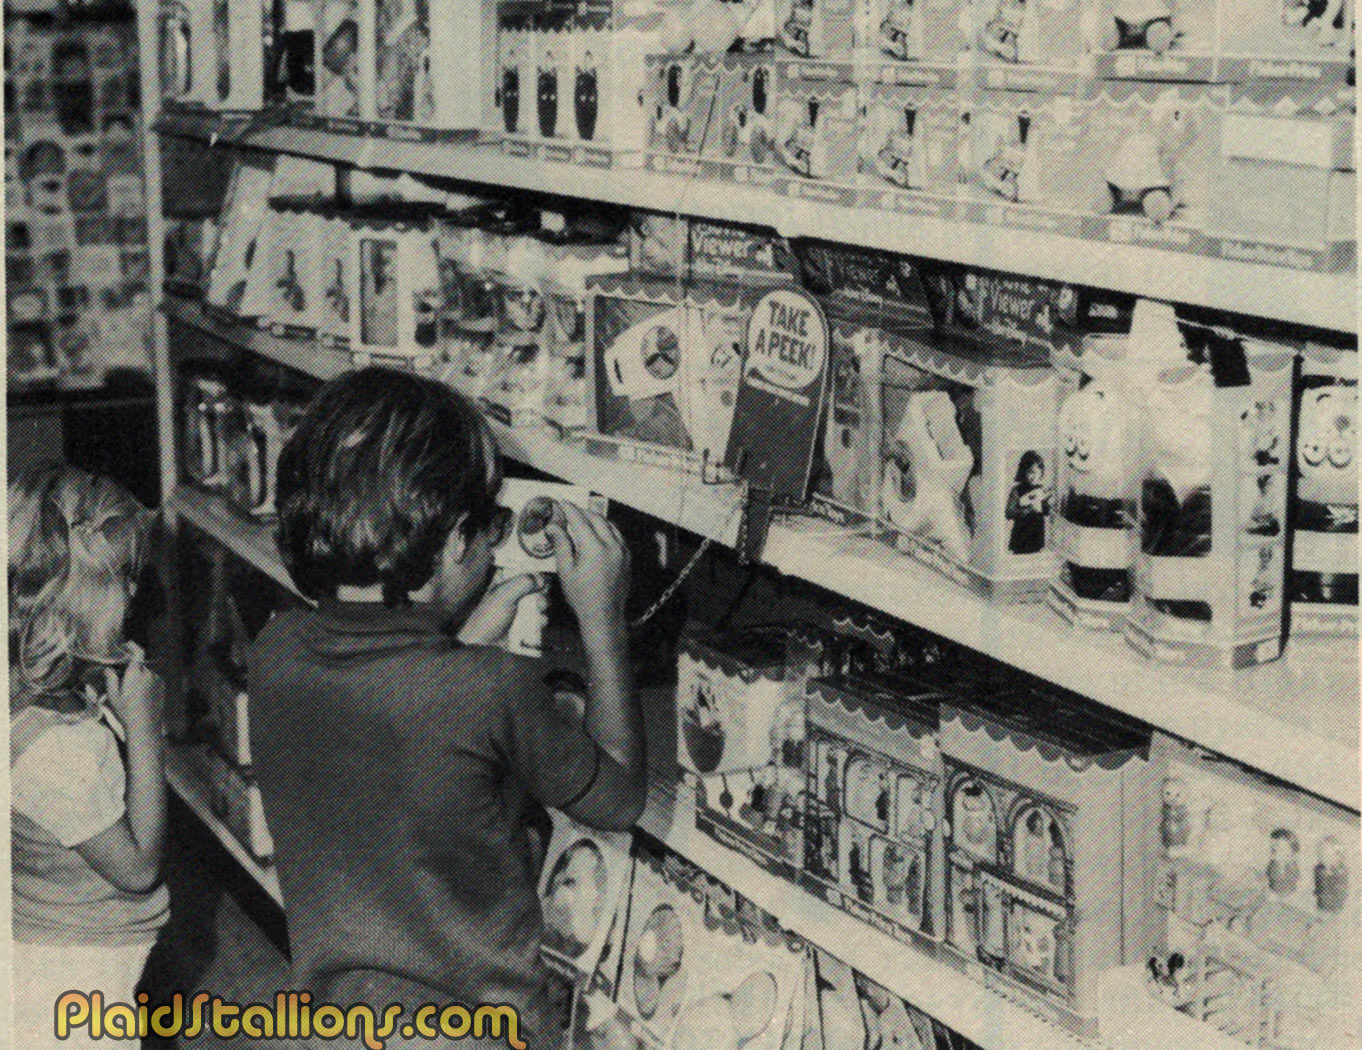 Fisher Price toy display in 1980 